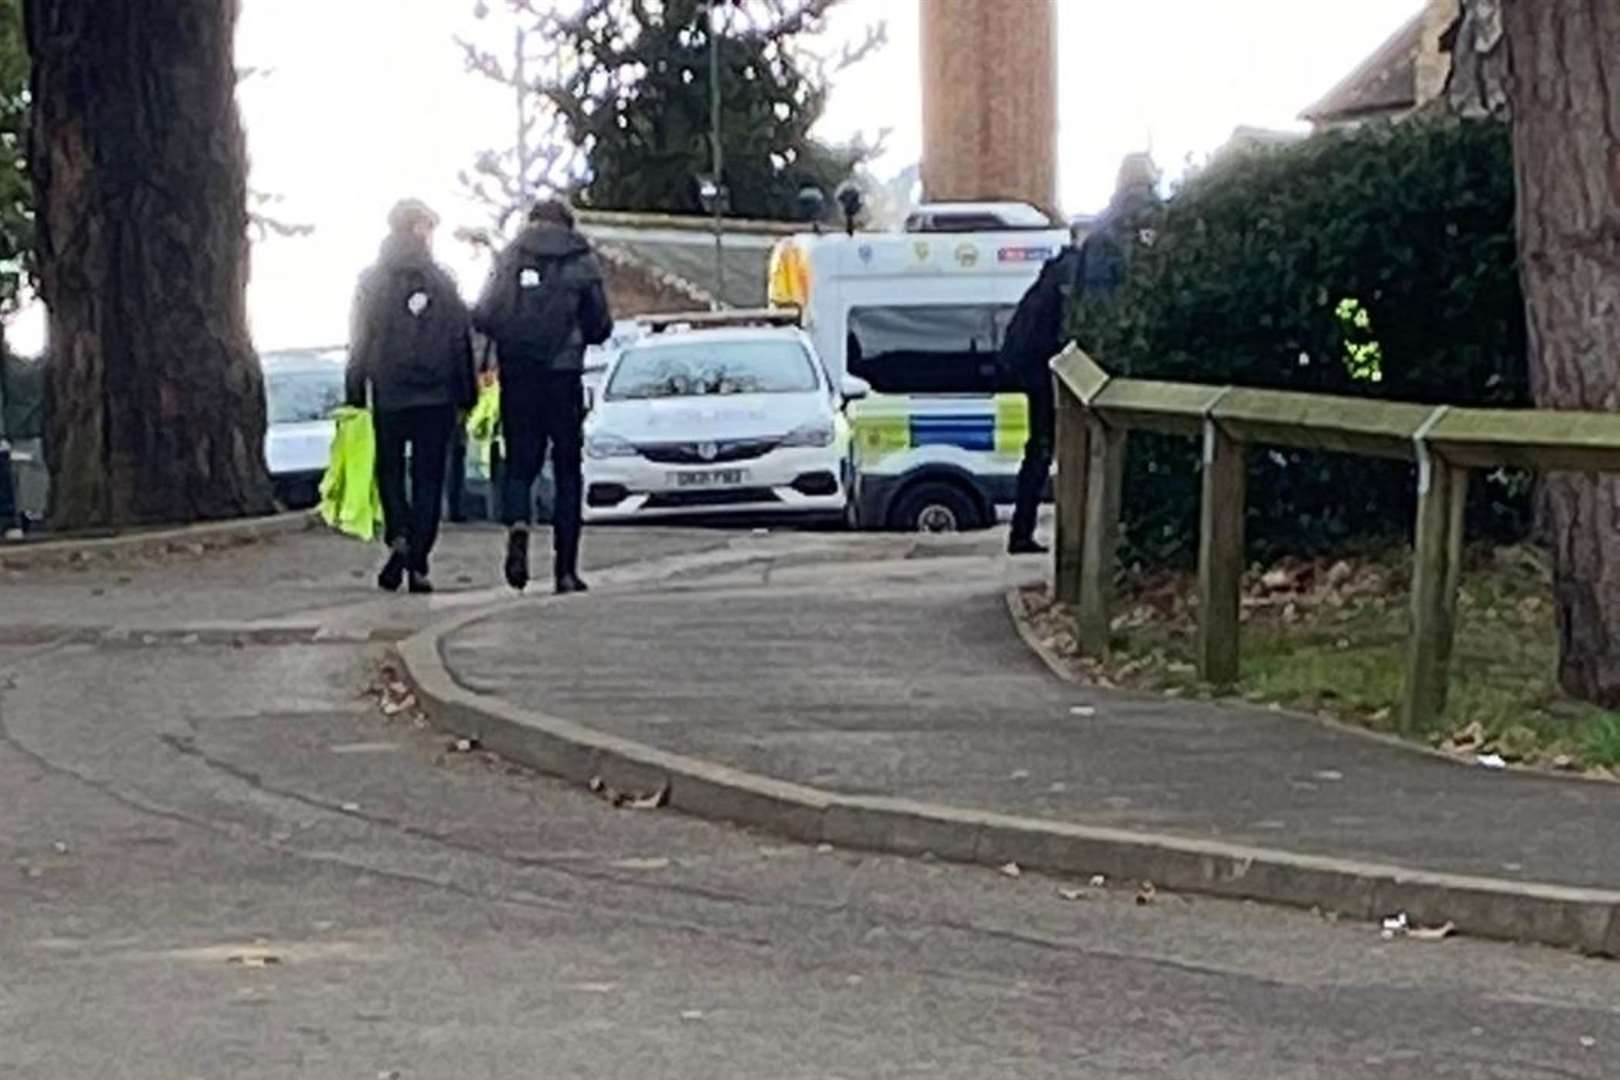 Police were called to the school this morning